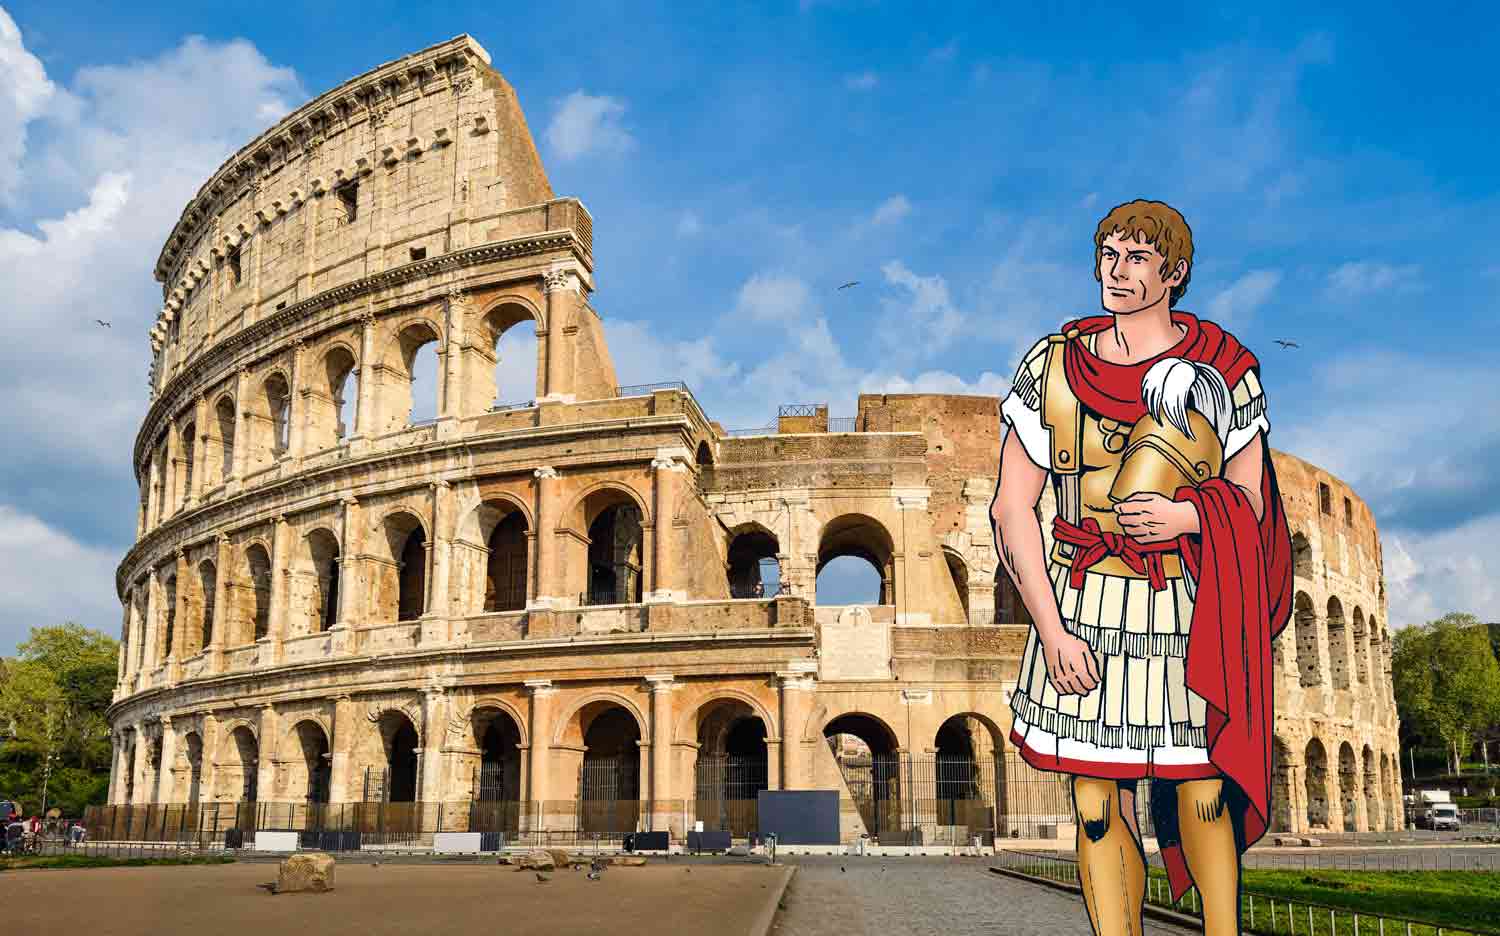 A cartoon gladiator stands in front of a photo of the ruins of the Colosseum.